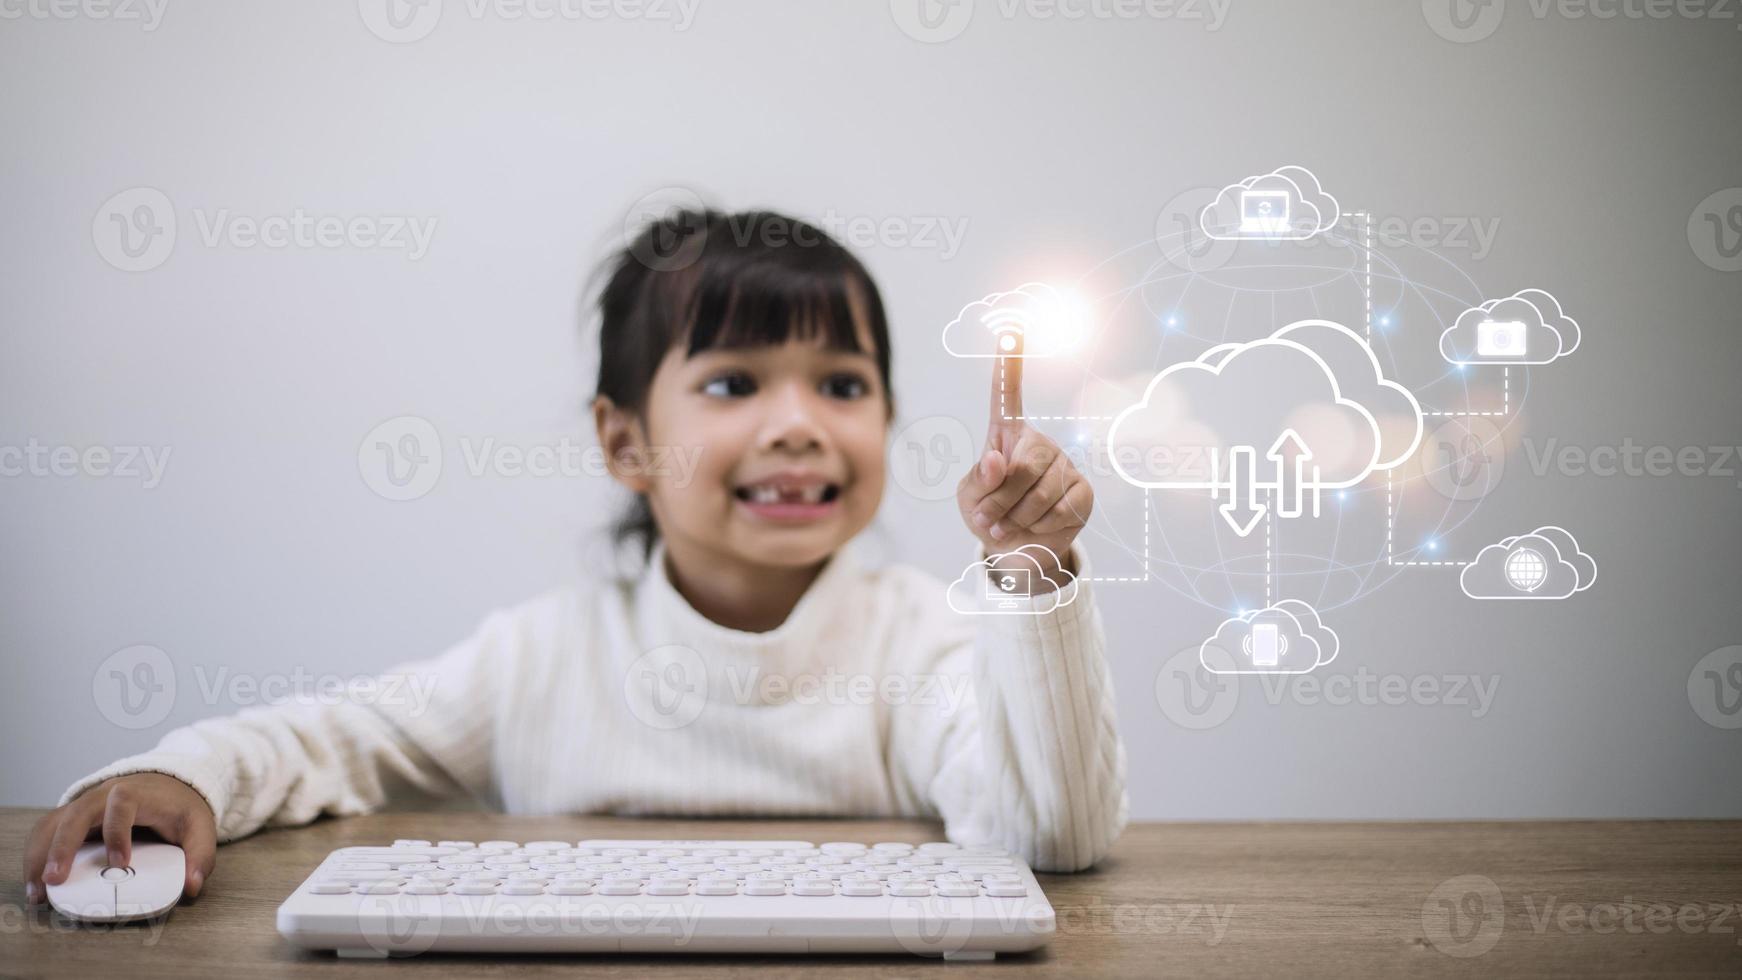 Icon cloud computing network and icon connection data information. Cloud computing and technology concept. photo